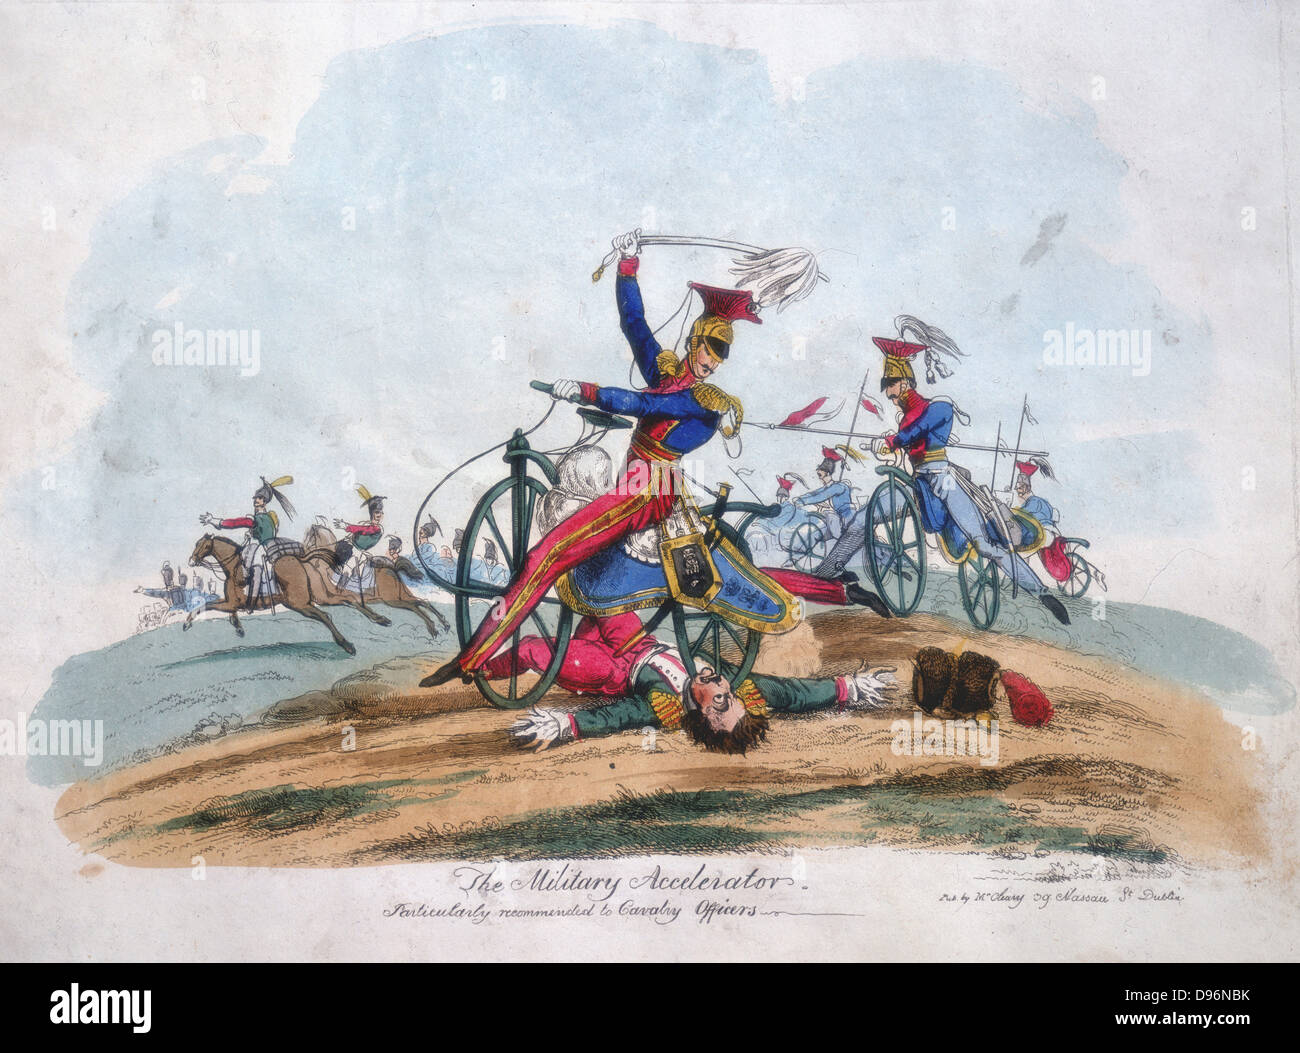 The Military Accelerator'. Suggested use by the Cavalryof the Hobby-Horse or Dandy-Horse introduced into the British Isles in 1818. From a print published in Dublin c1820. Stock Photo